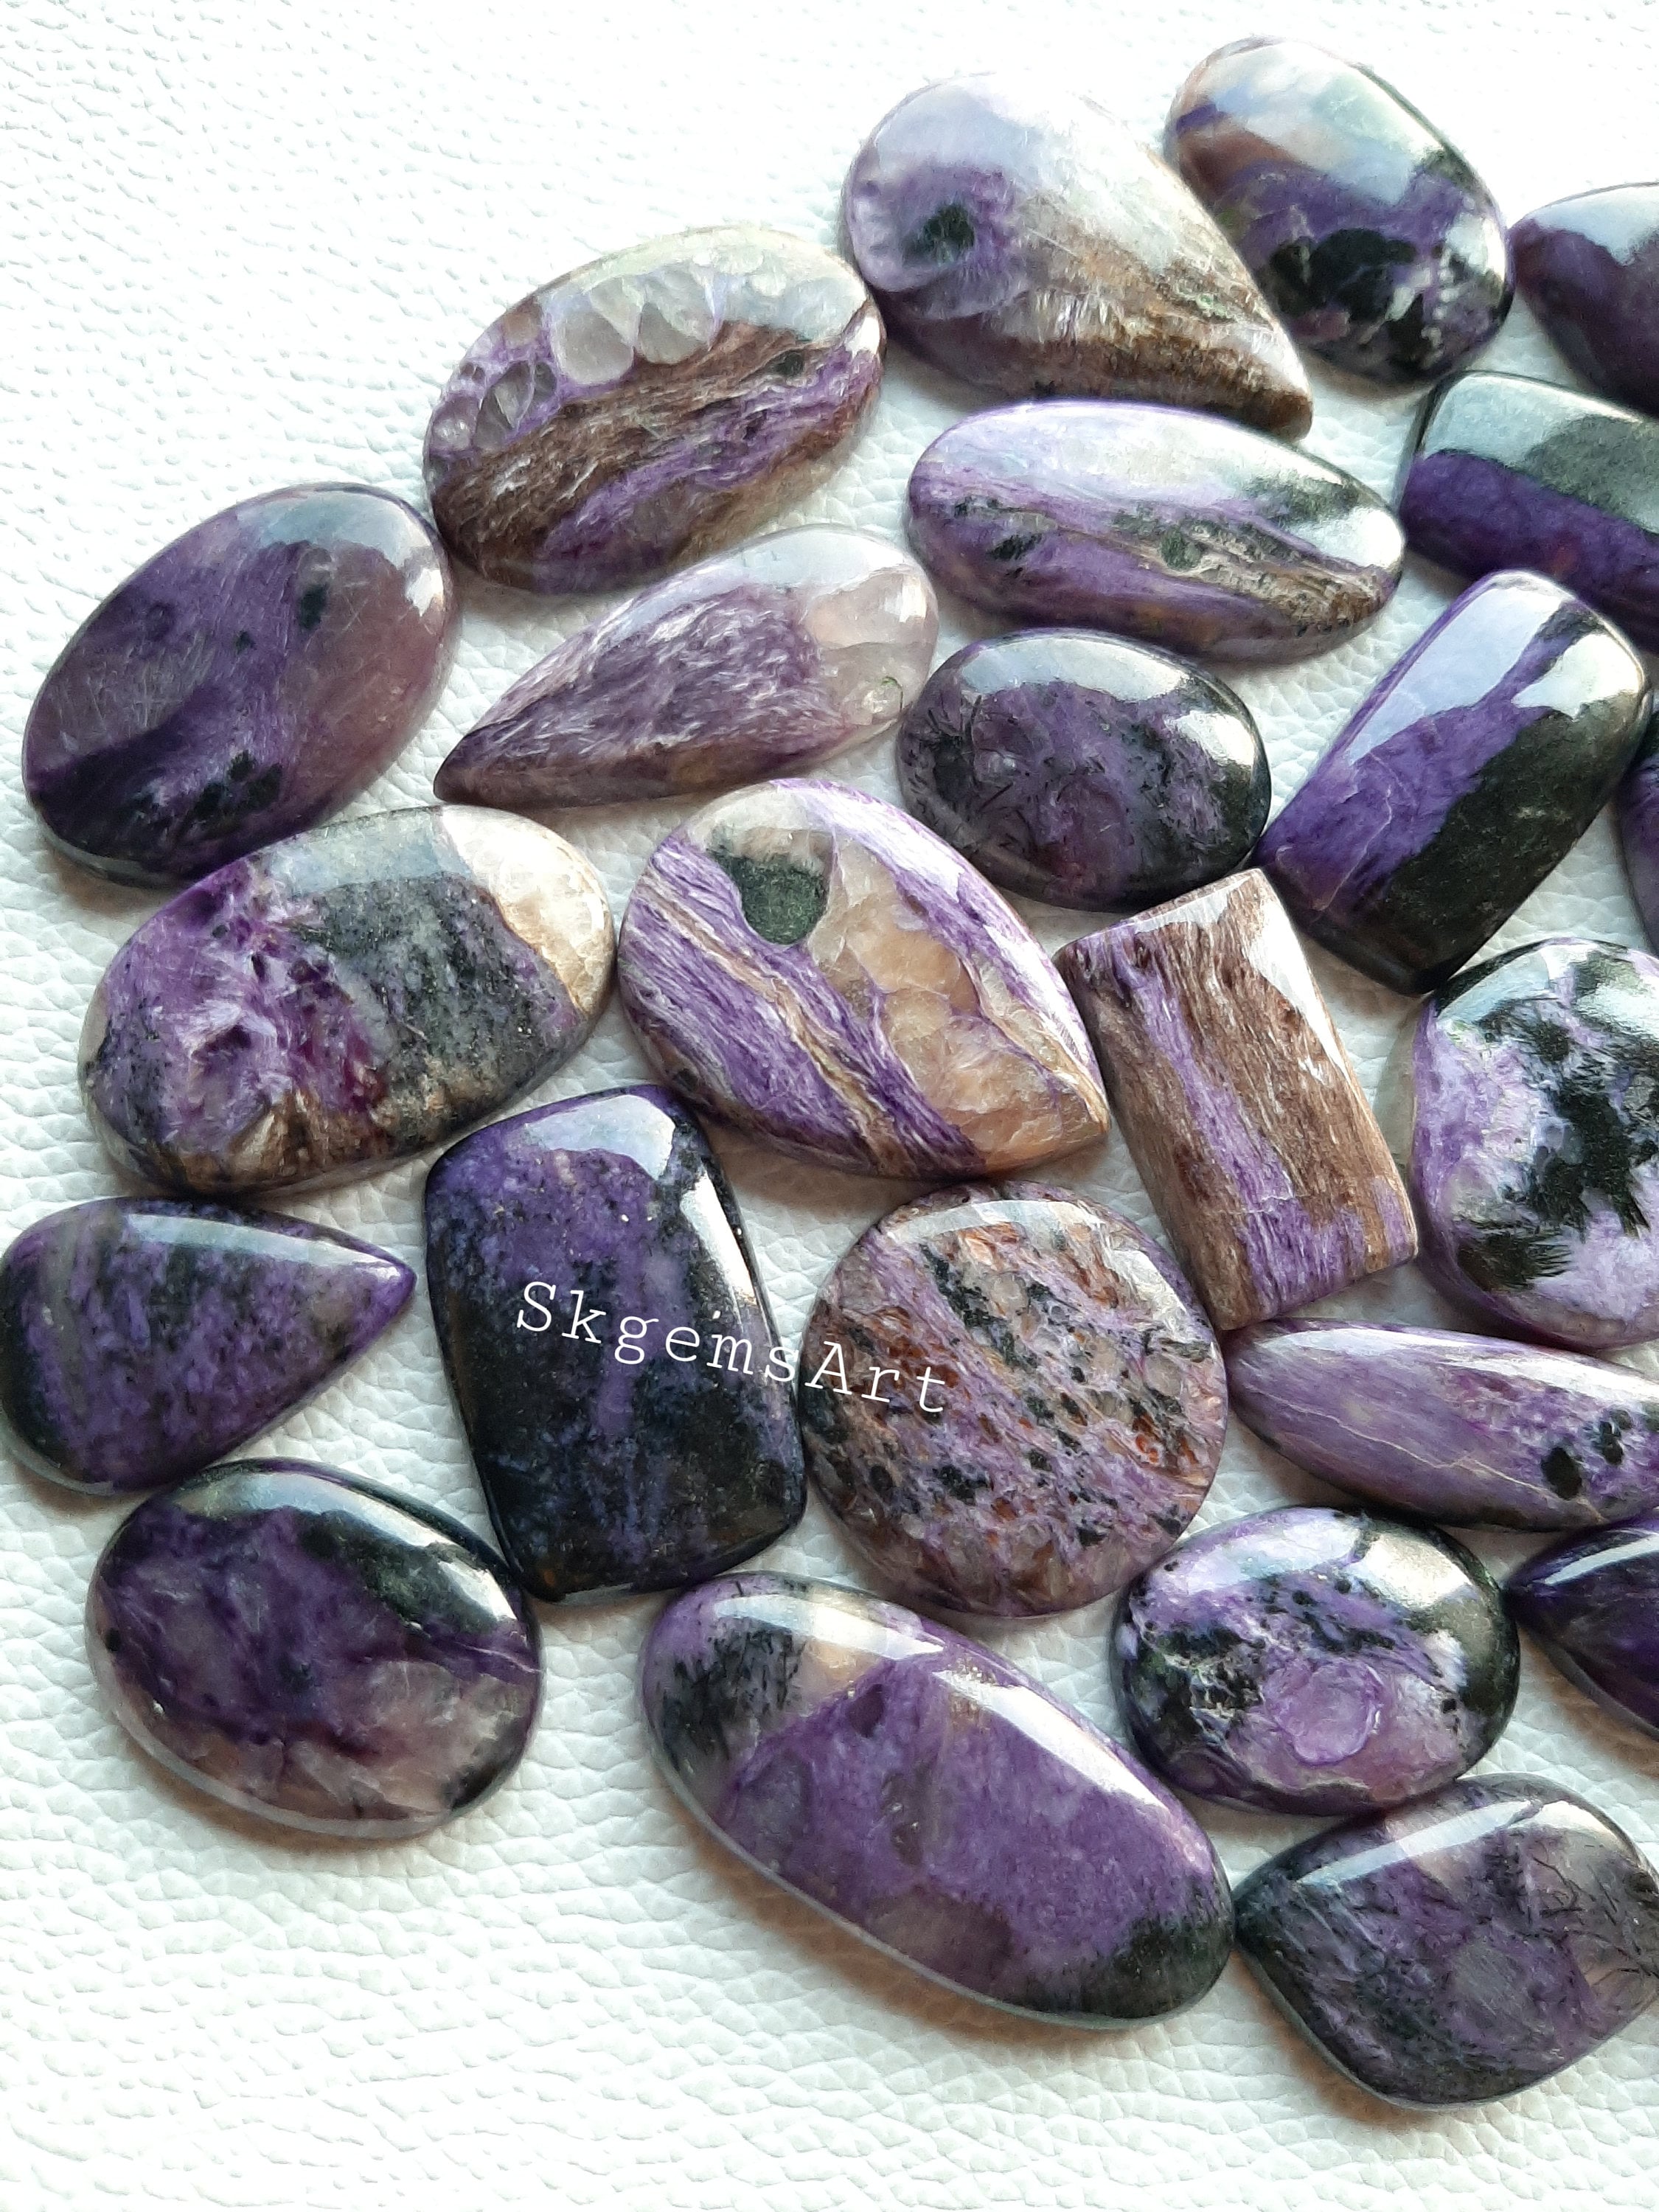 AAA Fine 100% Natural Russian Charoite Mix Cabochon Gemstone Collection CG-200 